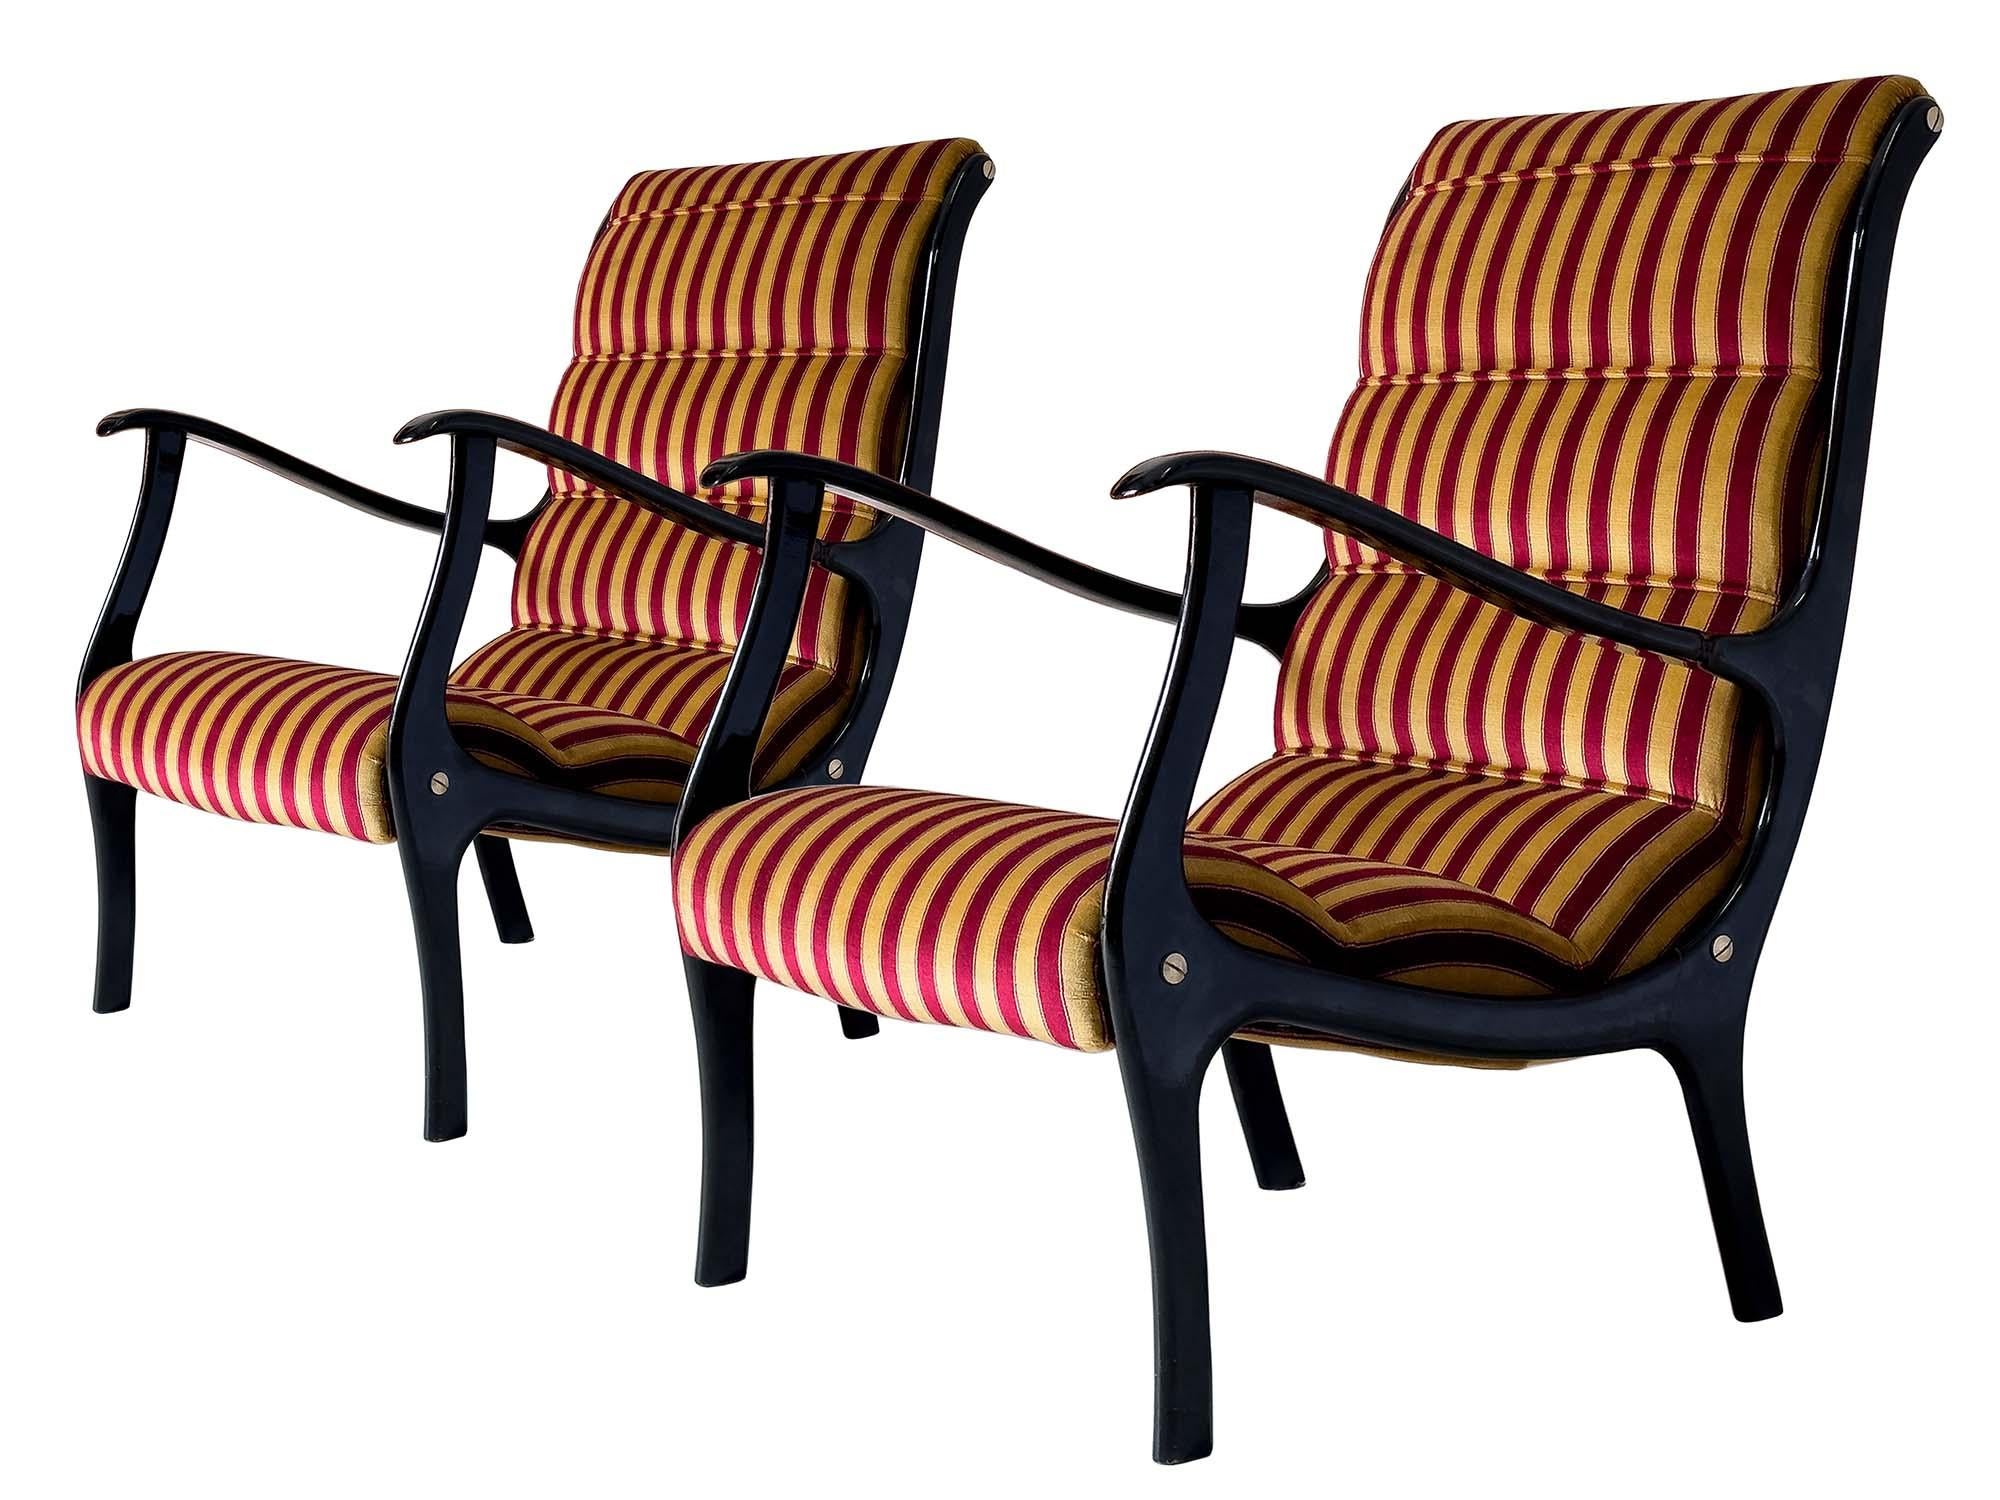 Stylish pair of Italian lounge chairs model ’MITZI’, well designed by Ezio Longhi for Elam in the 1950s.
The structures are in lacquered ebonized wood and the condition of the period are to be considered very good, with slight signs of wear